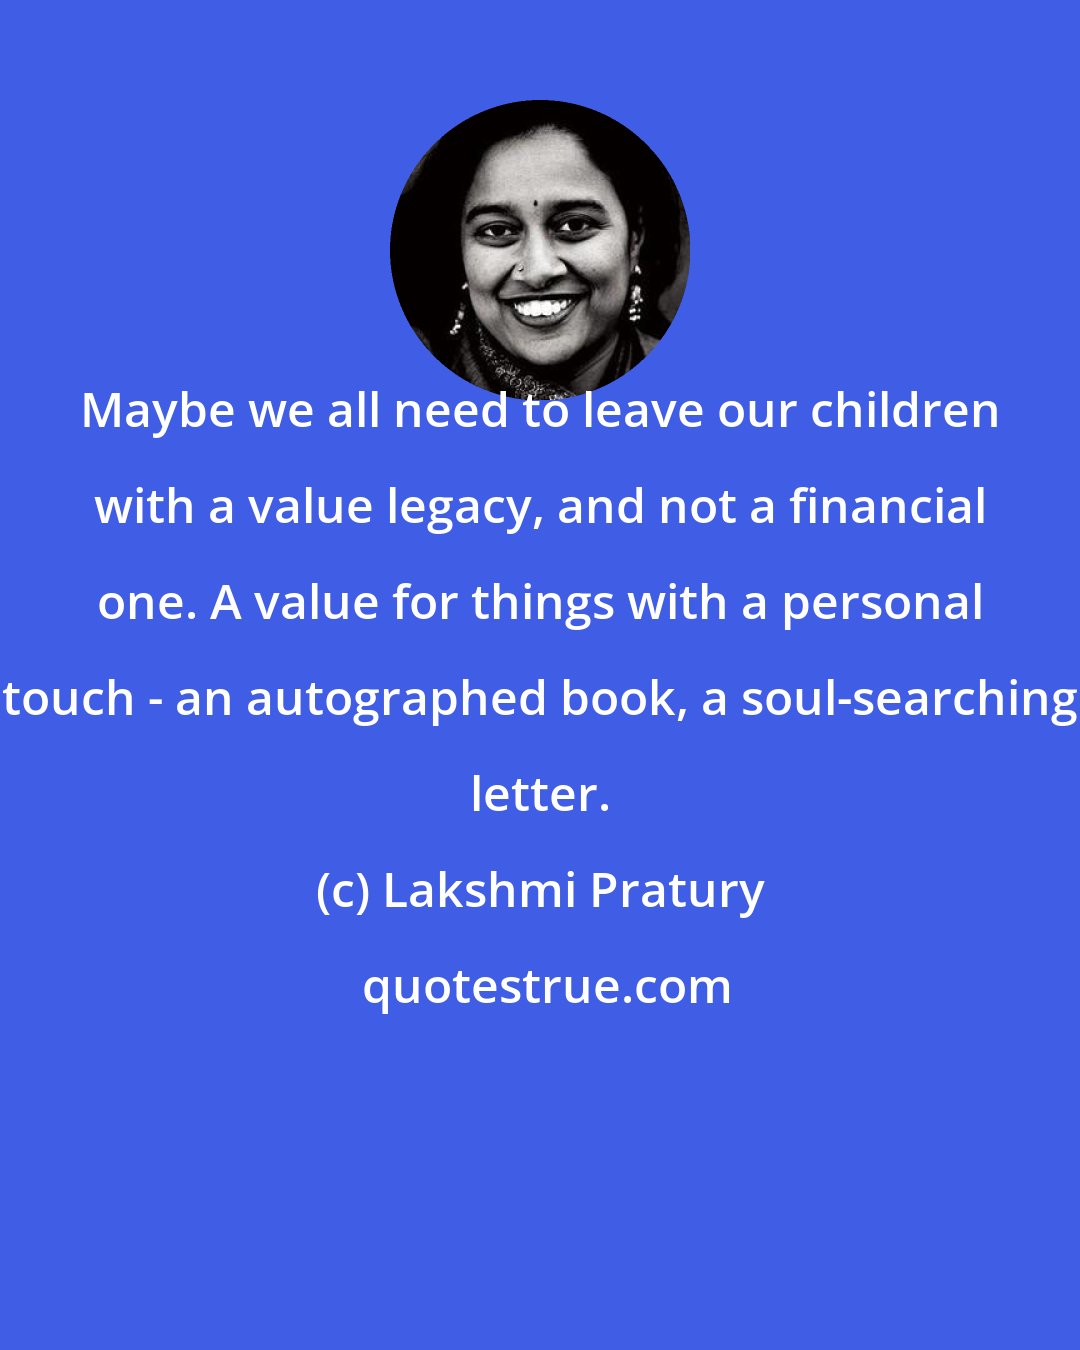 Lakshmi Pratury: Maybe we all need to leave our children with a value legacy, and not a financial one. A value for things with a personal touch - an autographed book, a soul-searching letter.